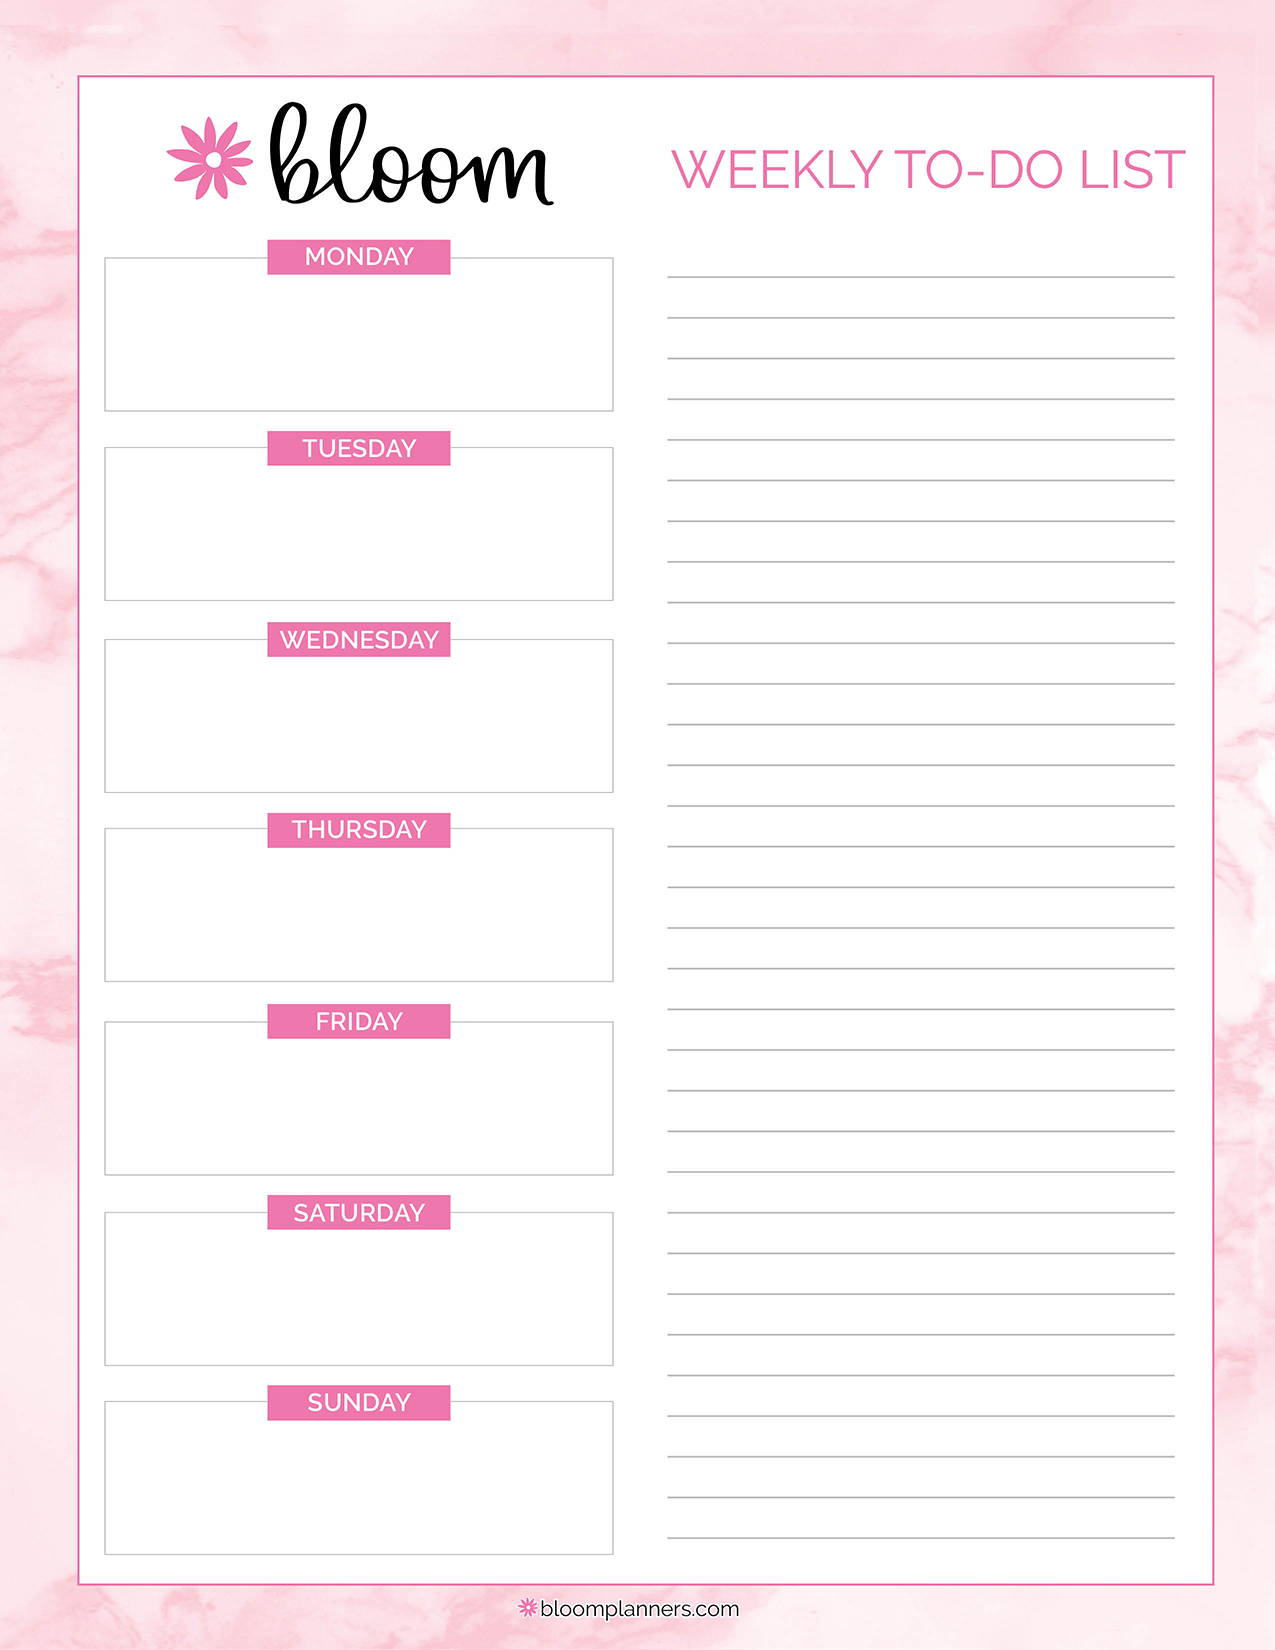 Free Printables Downloads Bloom Daily Planners